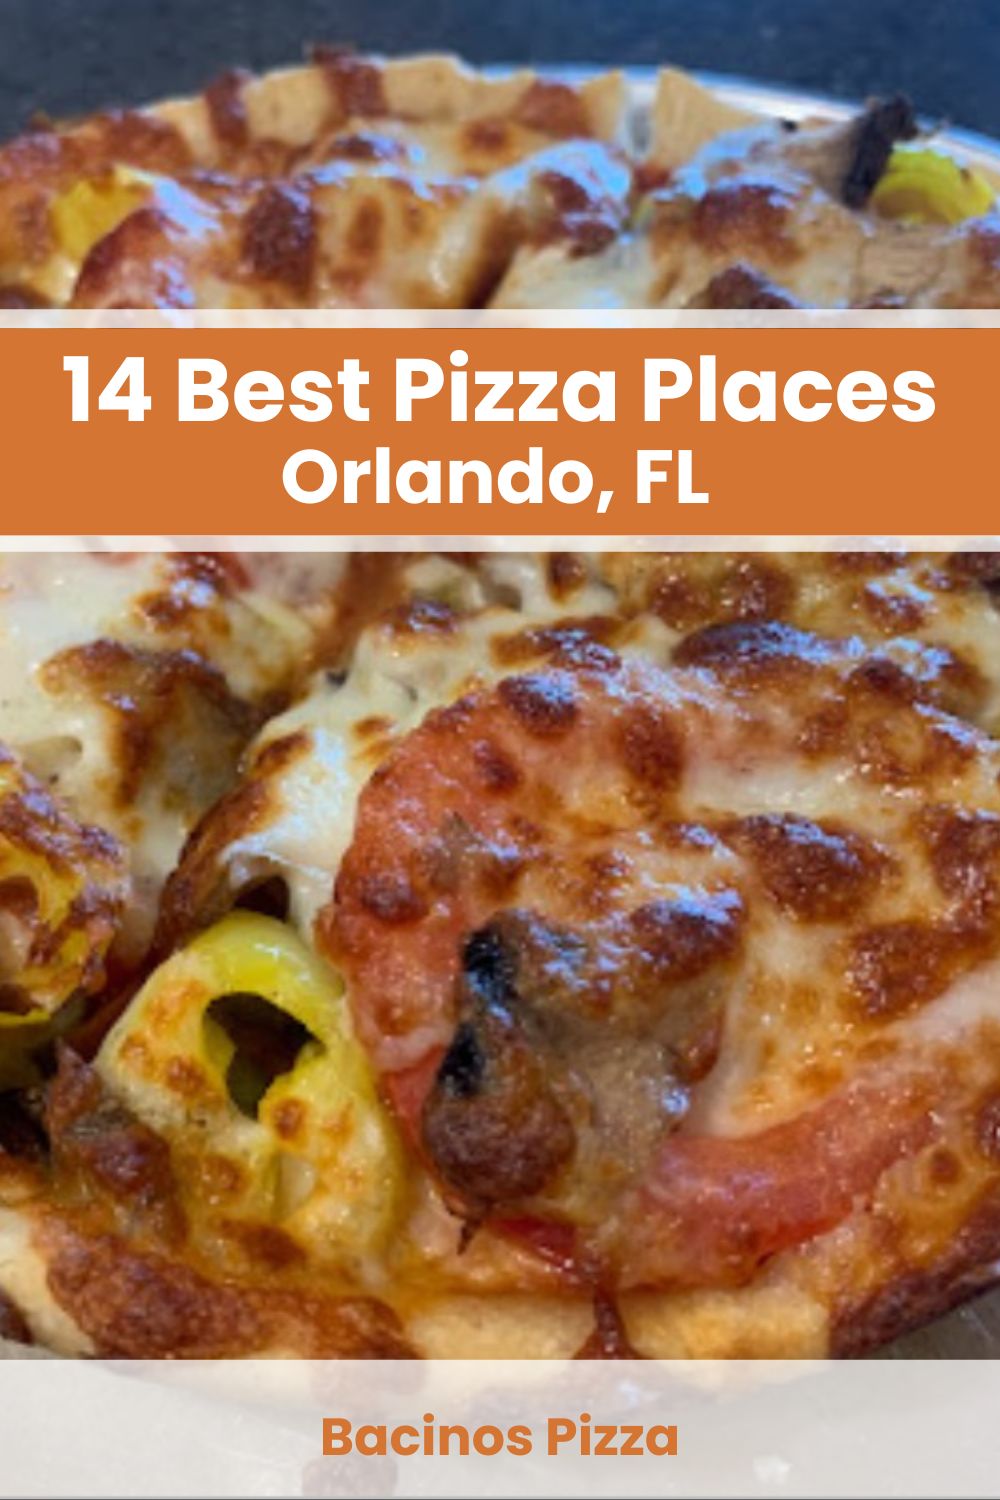 Best Pizza Places in Orlando